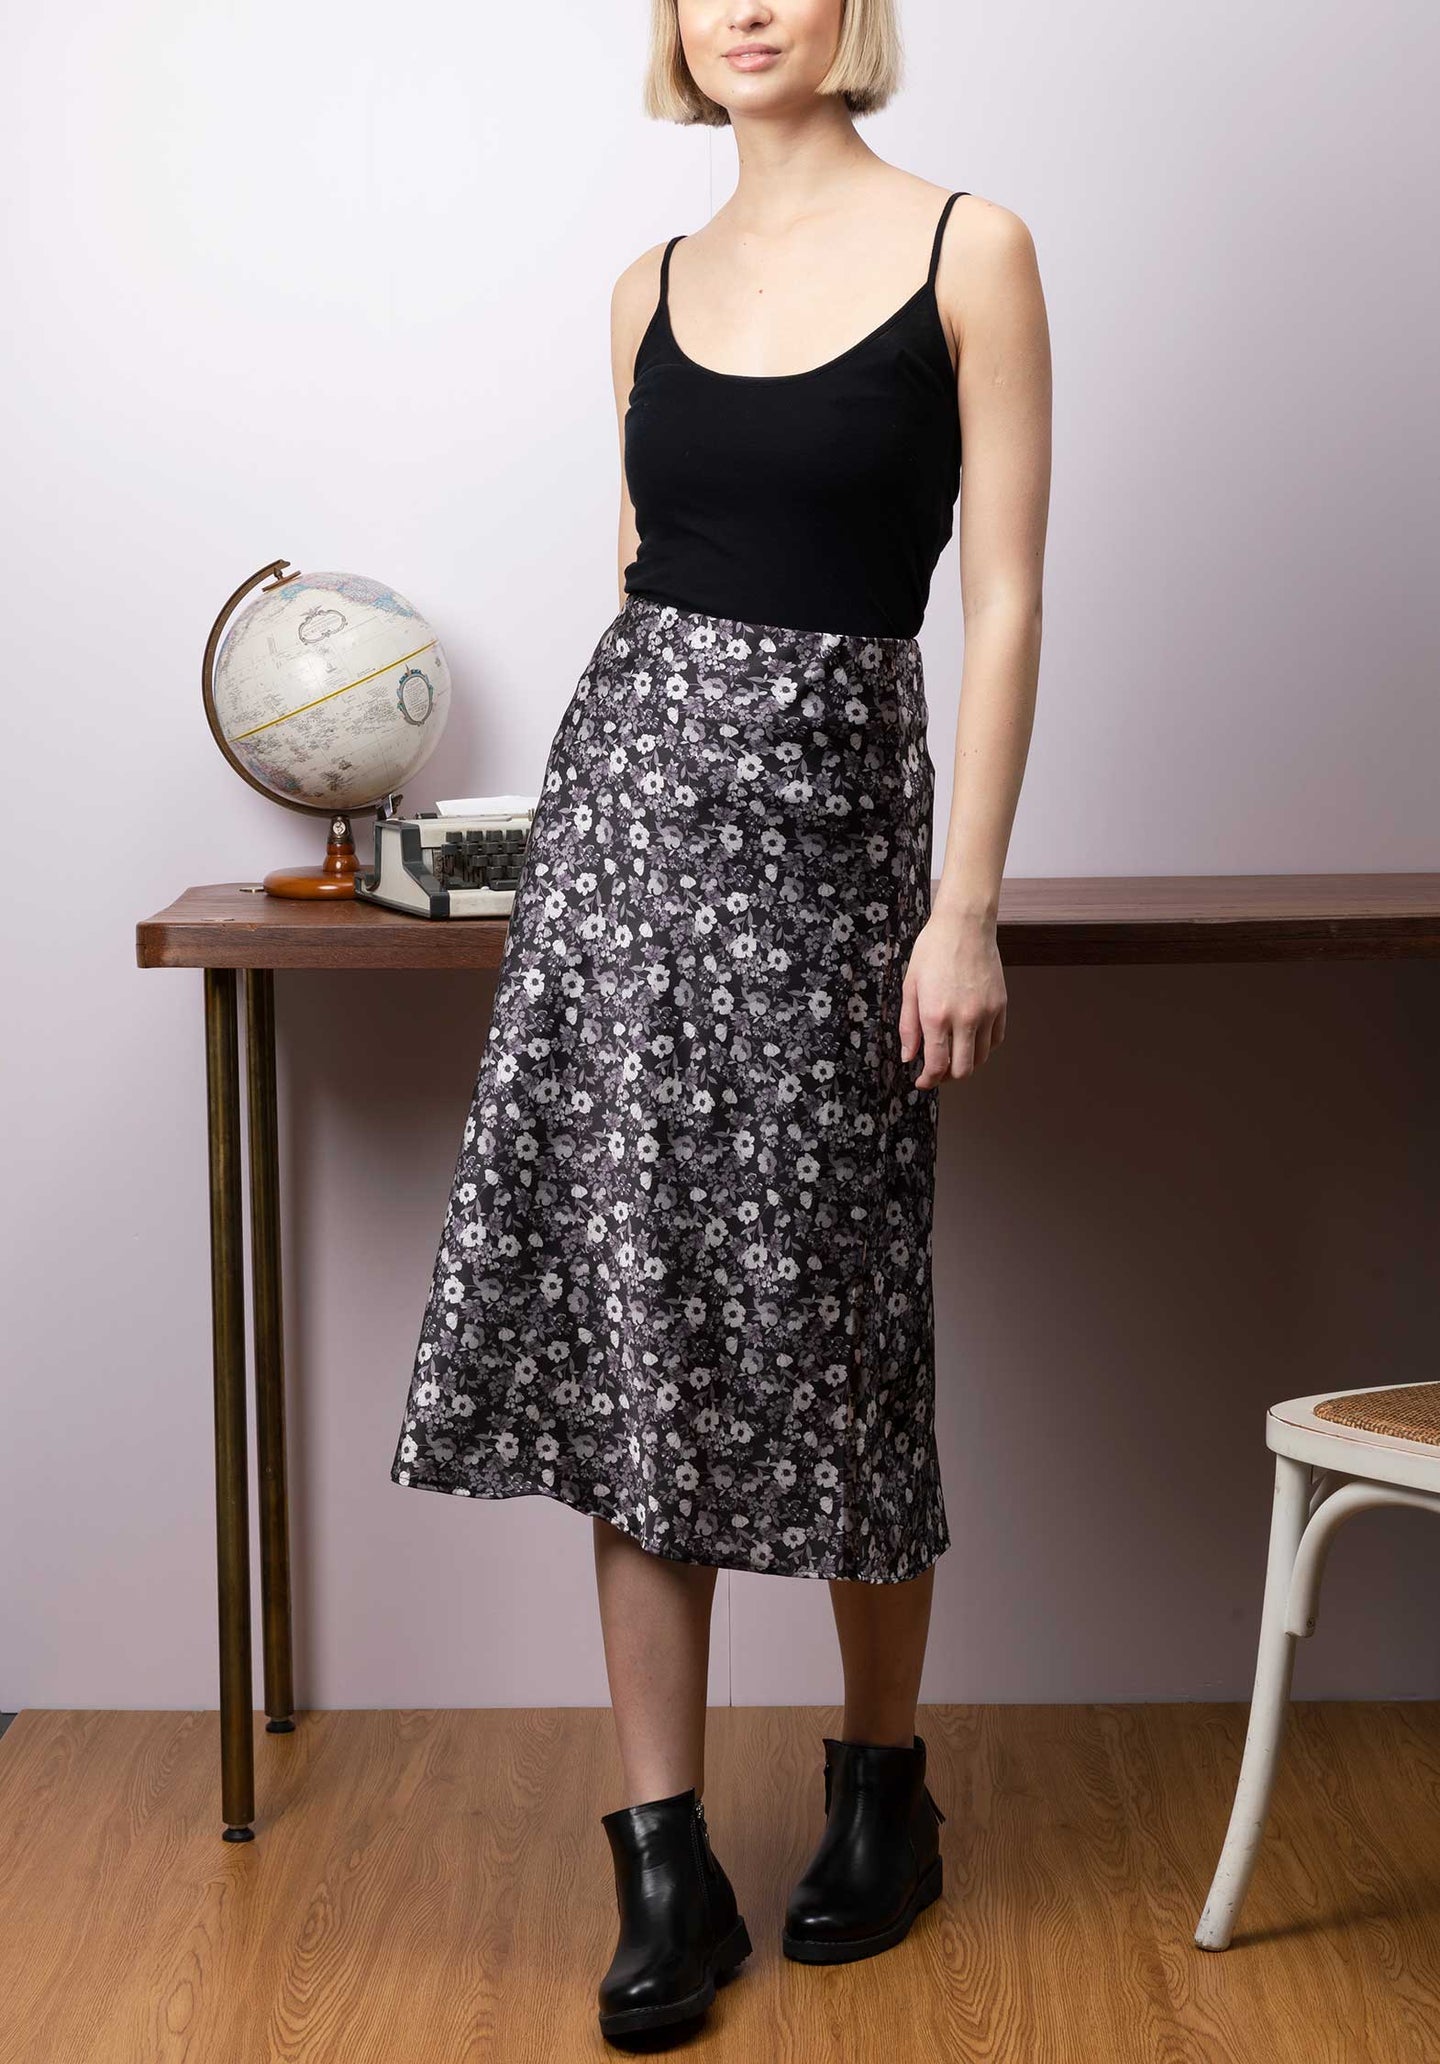 American Vintage dresses, pants and shirts for women